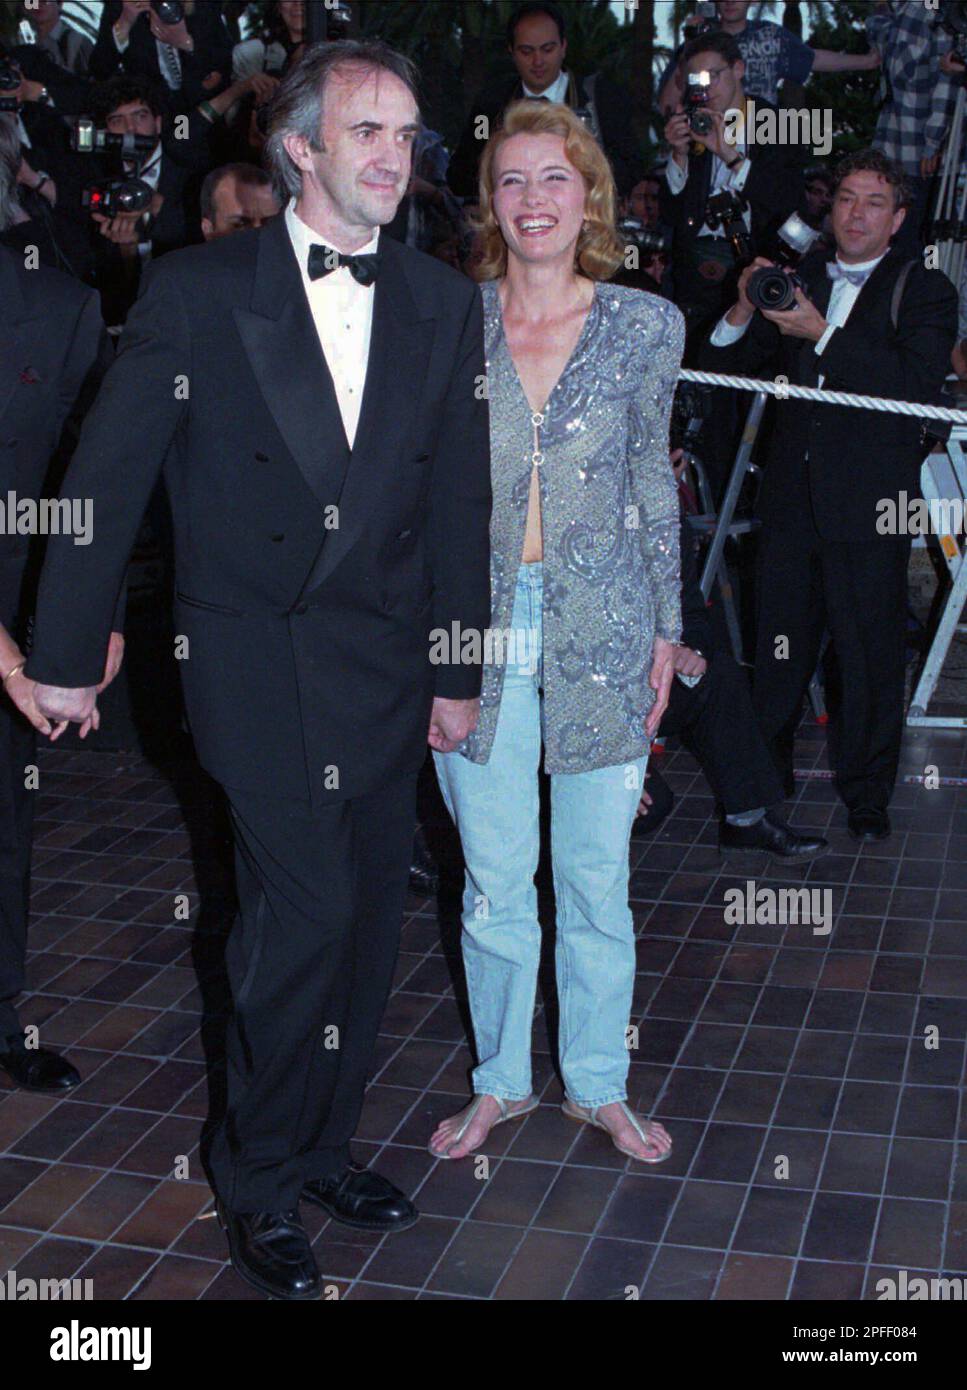 British film star Emma Thompson wears sandals and jeans as she arrives with  co-star Welsh actor Jonathan Pryce at the Festival Palace in Cannes, French  Riviera on Sunday May 21, 1995, to